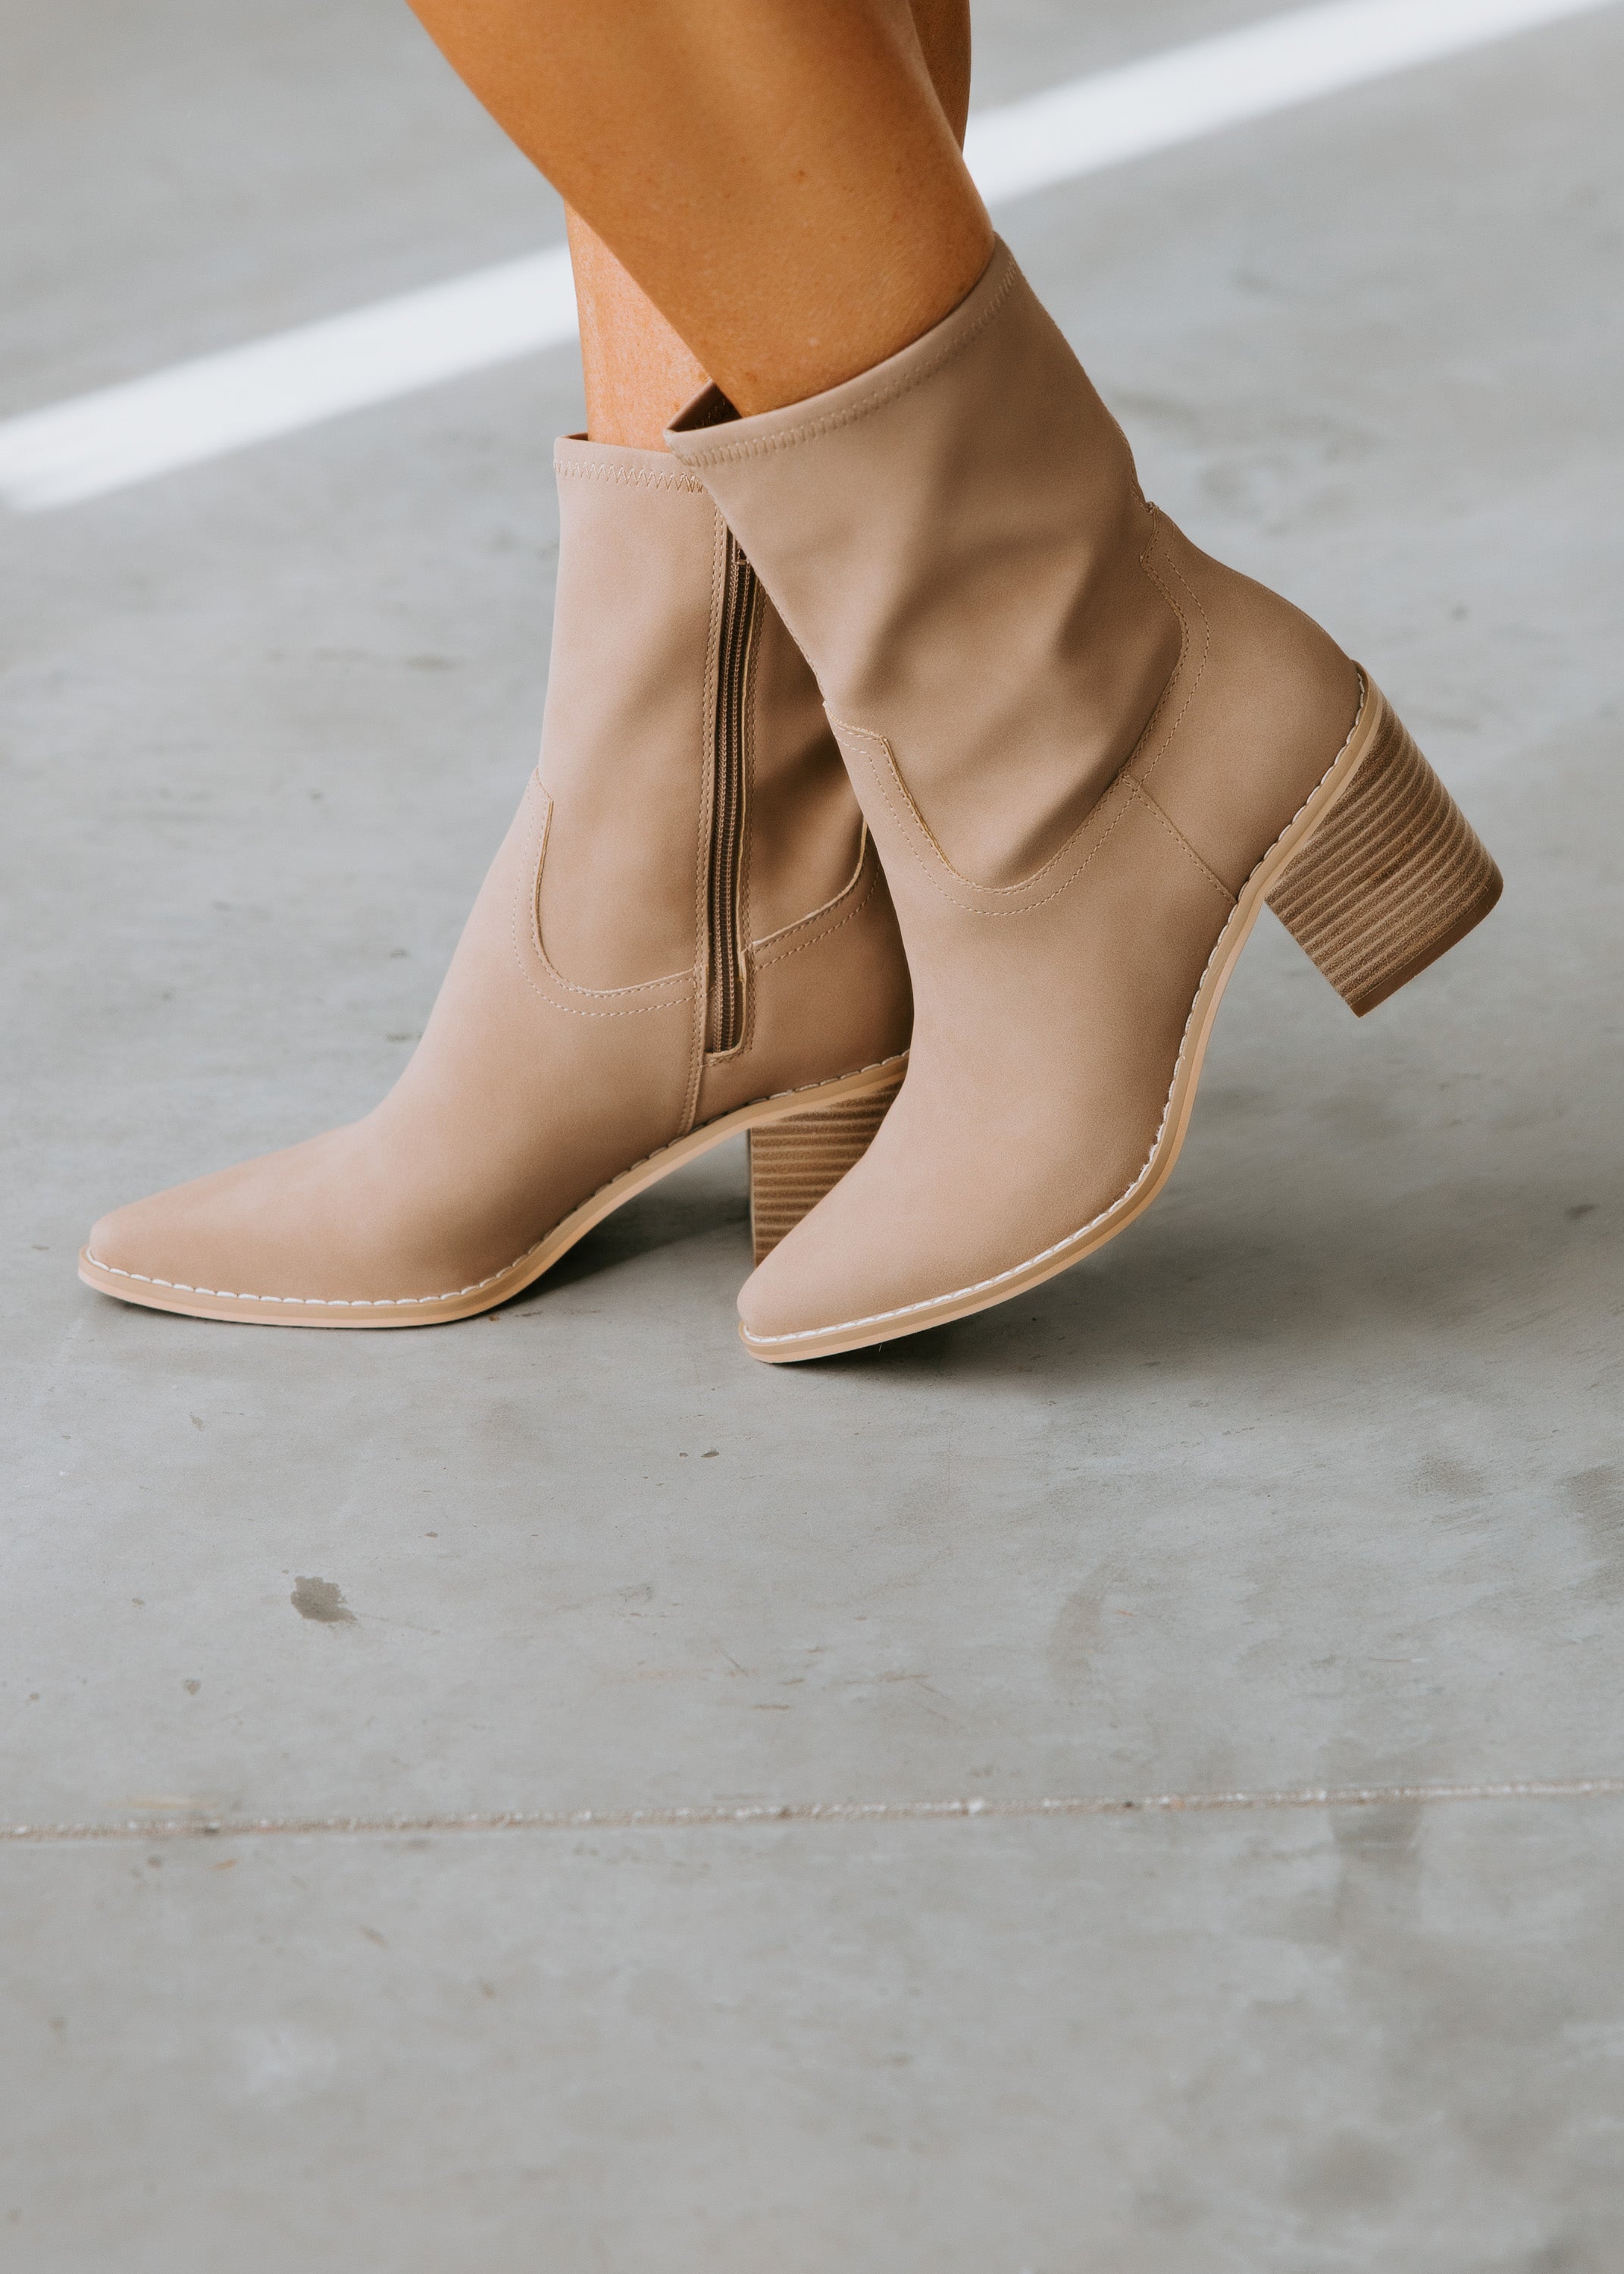 image of Vienna Ankle Booties